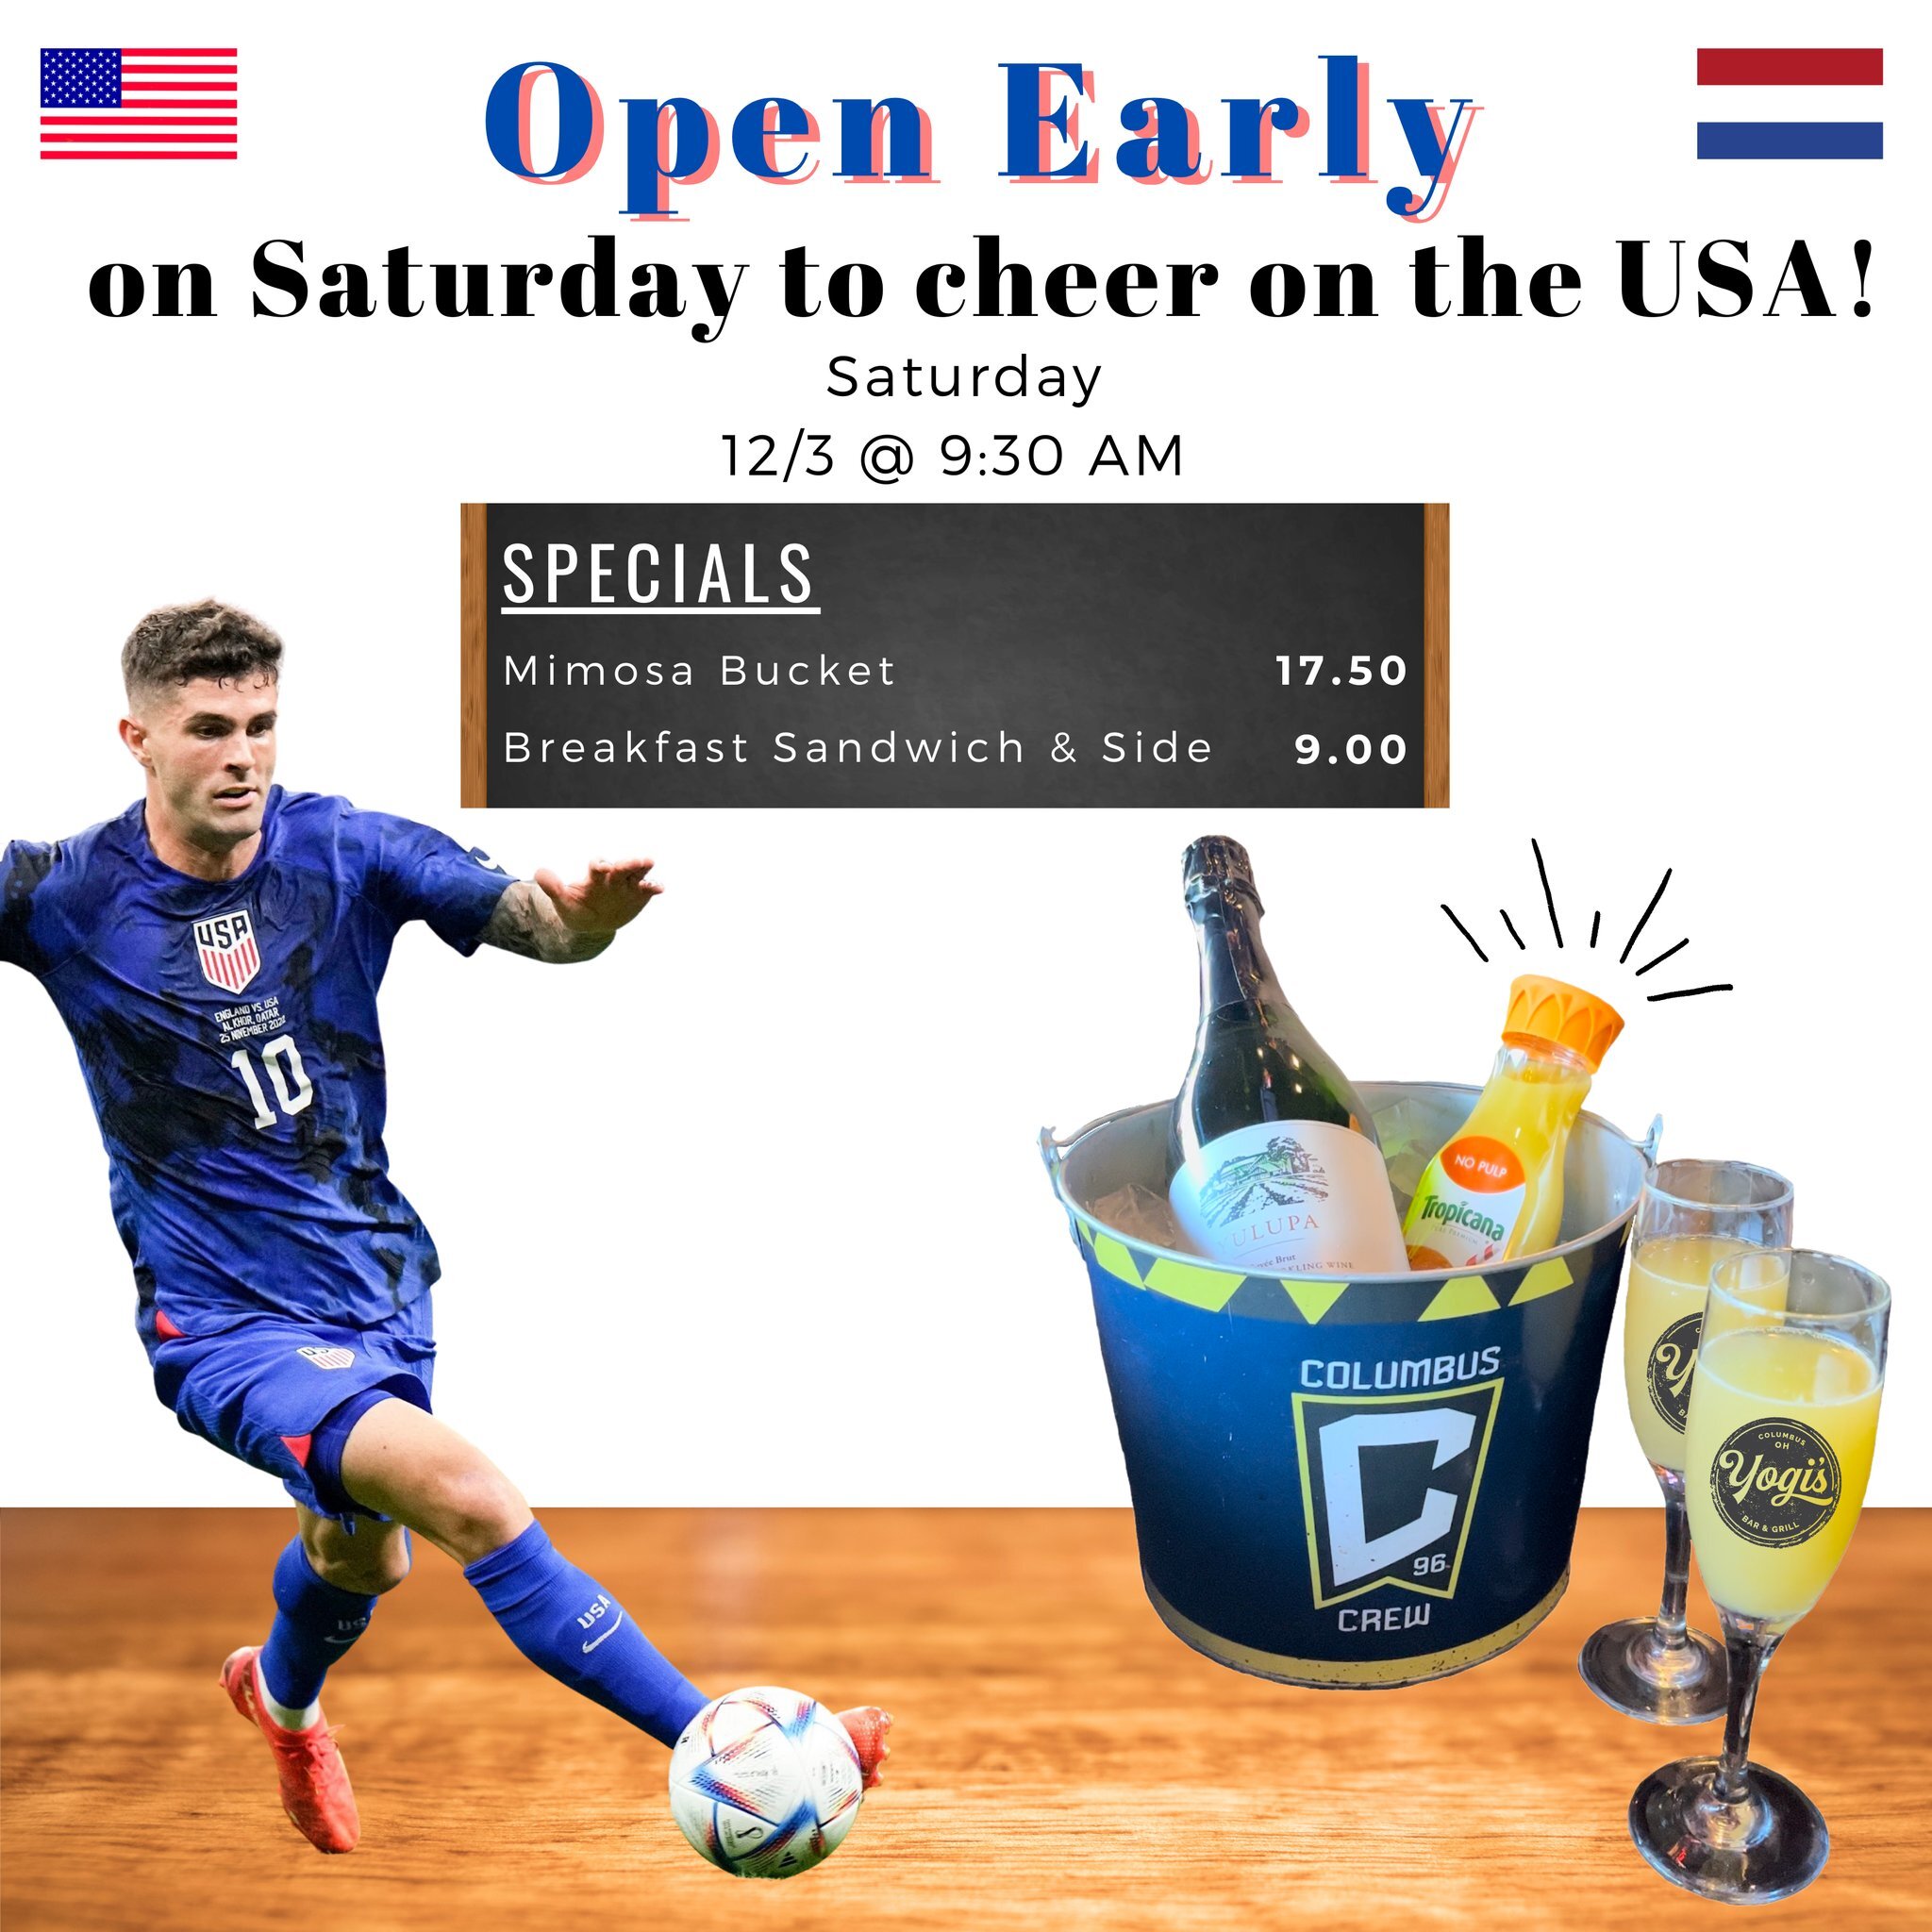 USA! USA! USA! 🇺🇸 Join us at Yogi's to Cheer on the USA with all your friends &amp; a Bucket of Mimosas! 🥂See you Saturday at 9:30am ⚽ #worldcup #WorldCup2022 #usa #fifaworldcup #FIFAWorldCup2022 #yogisbarandgrill